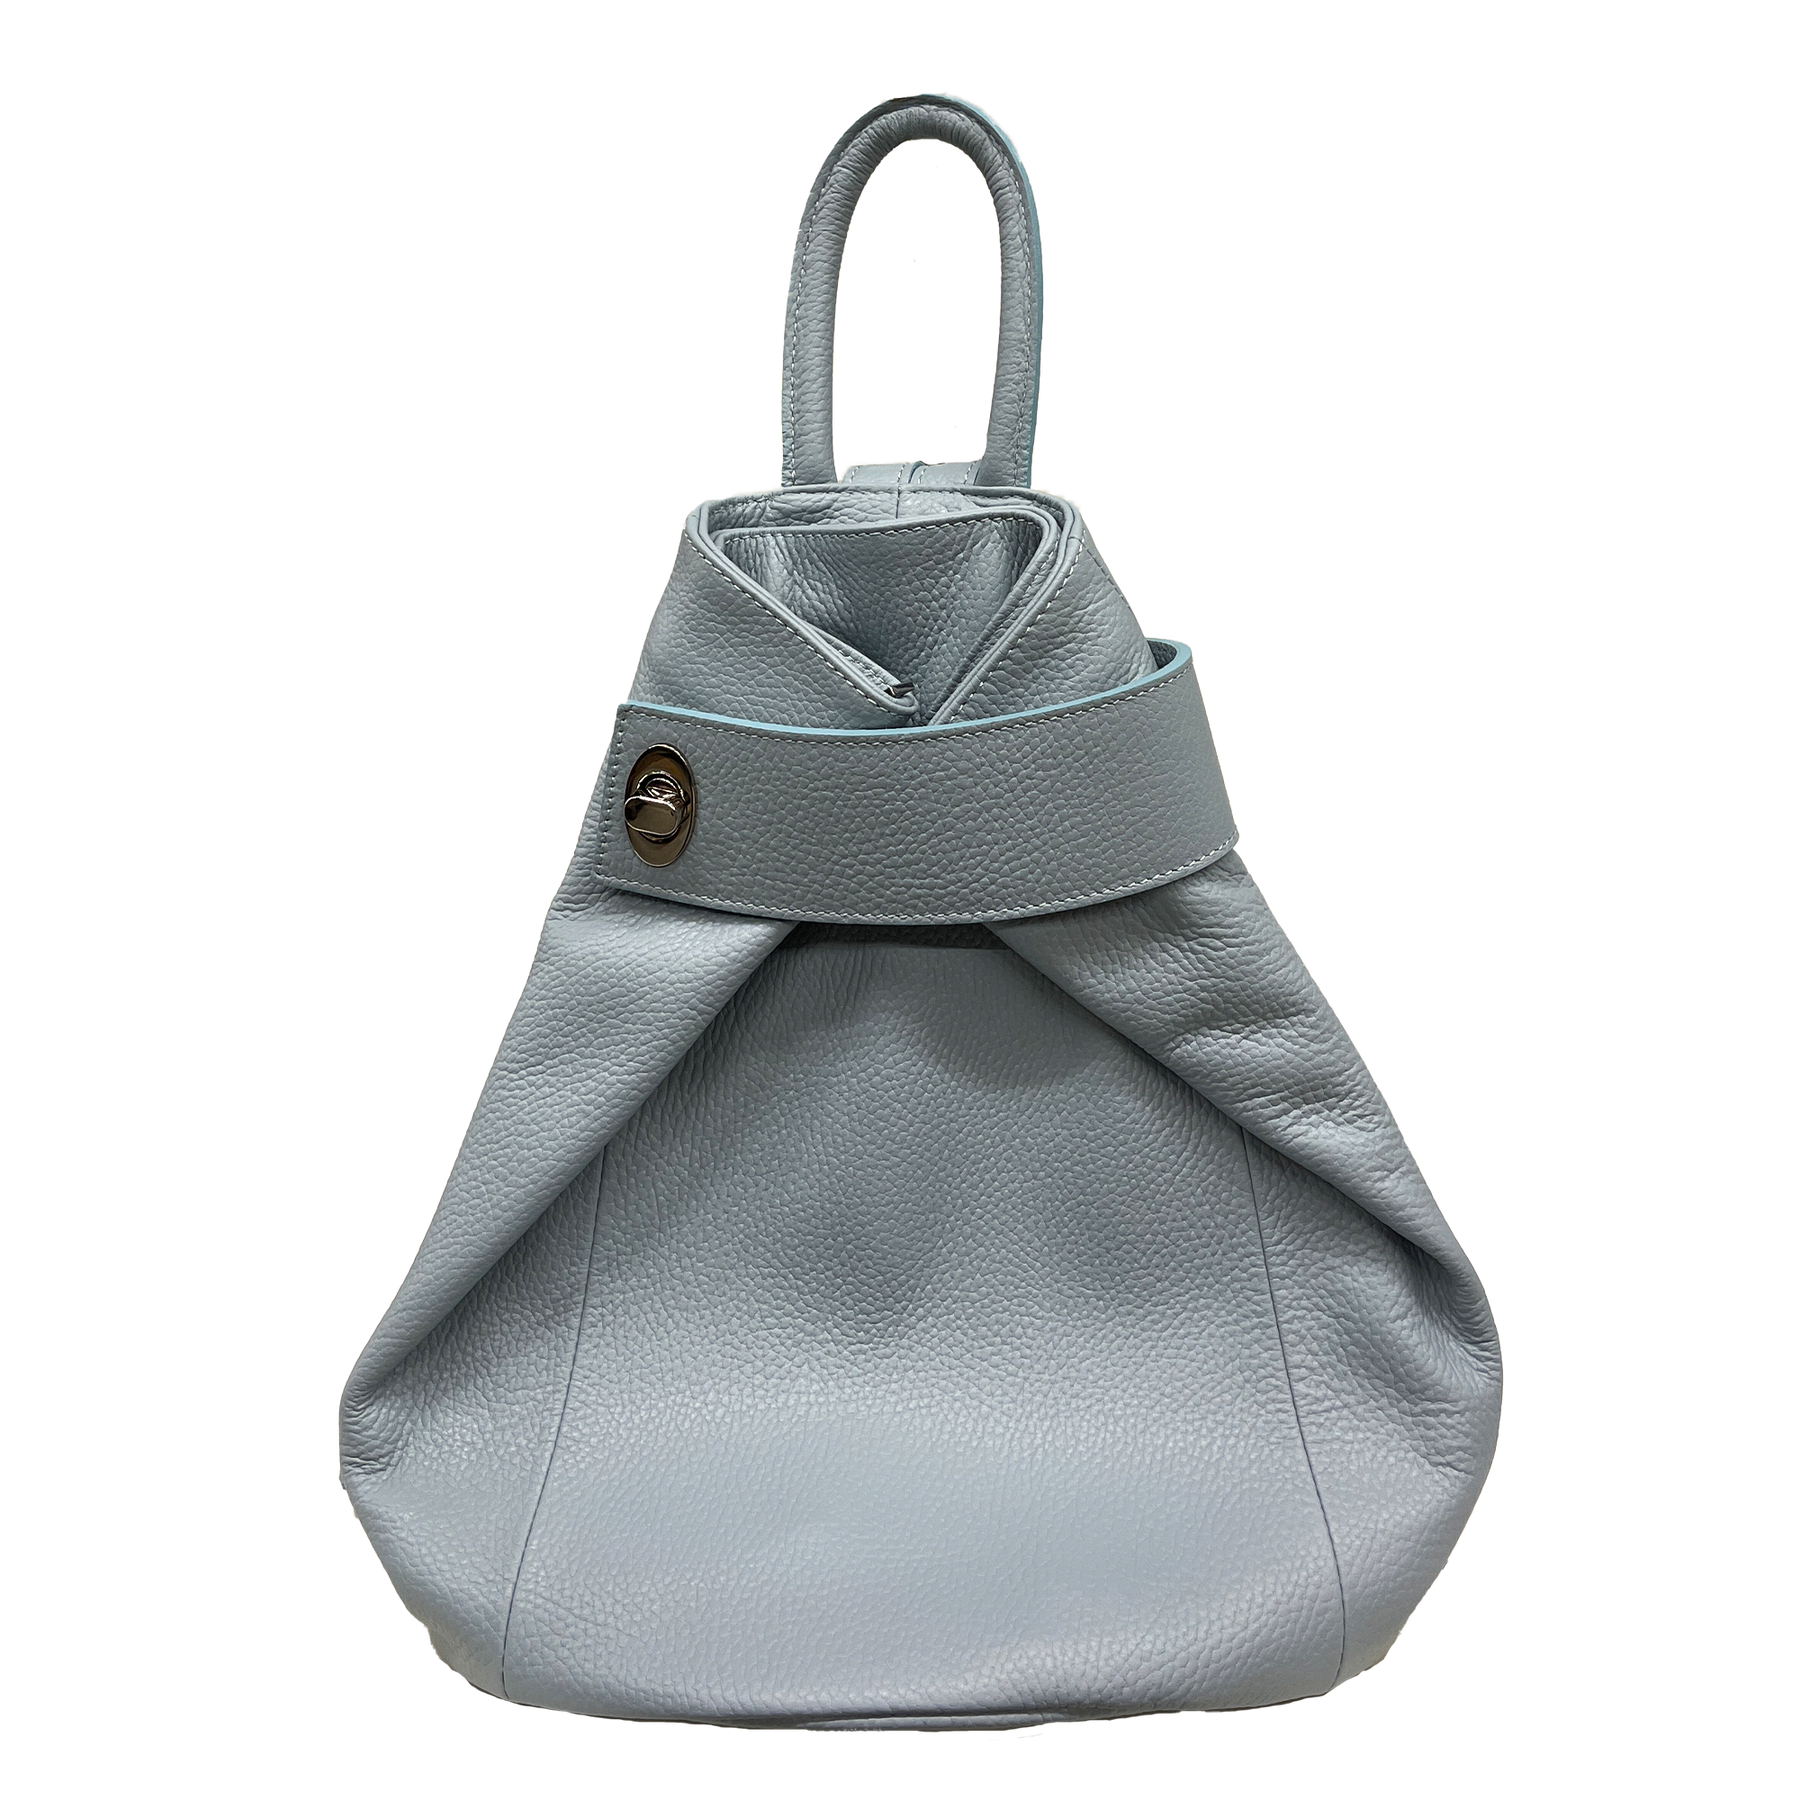 Convertible backpack in luxury leather - versatile and premium finish